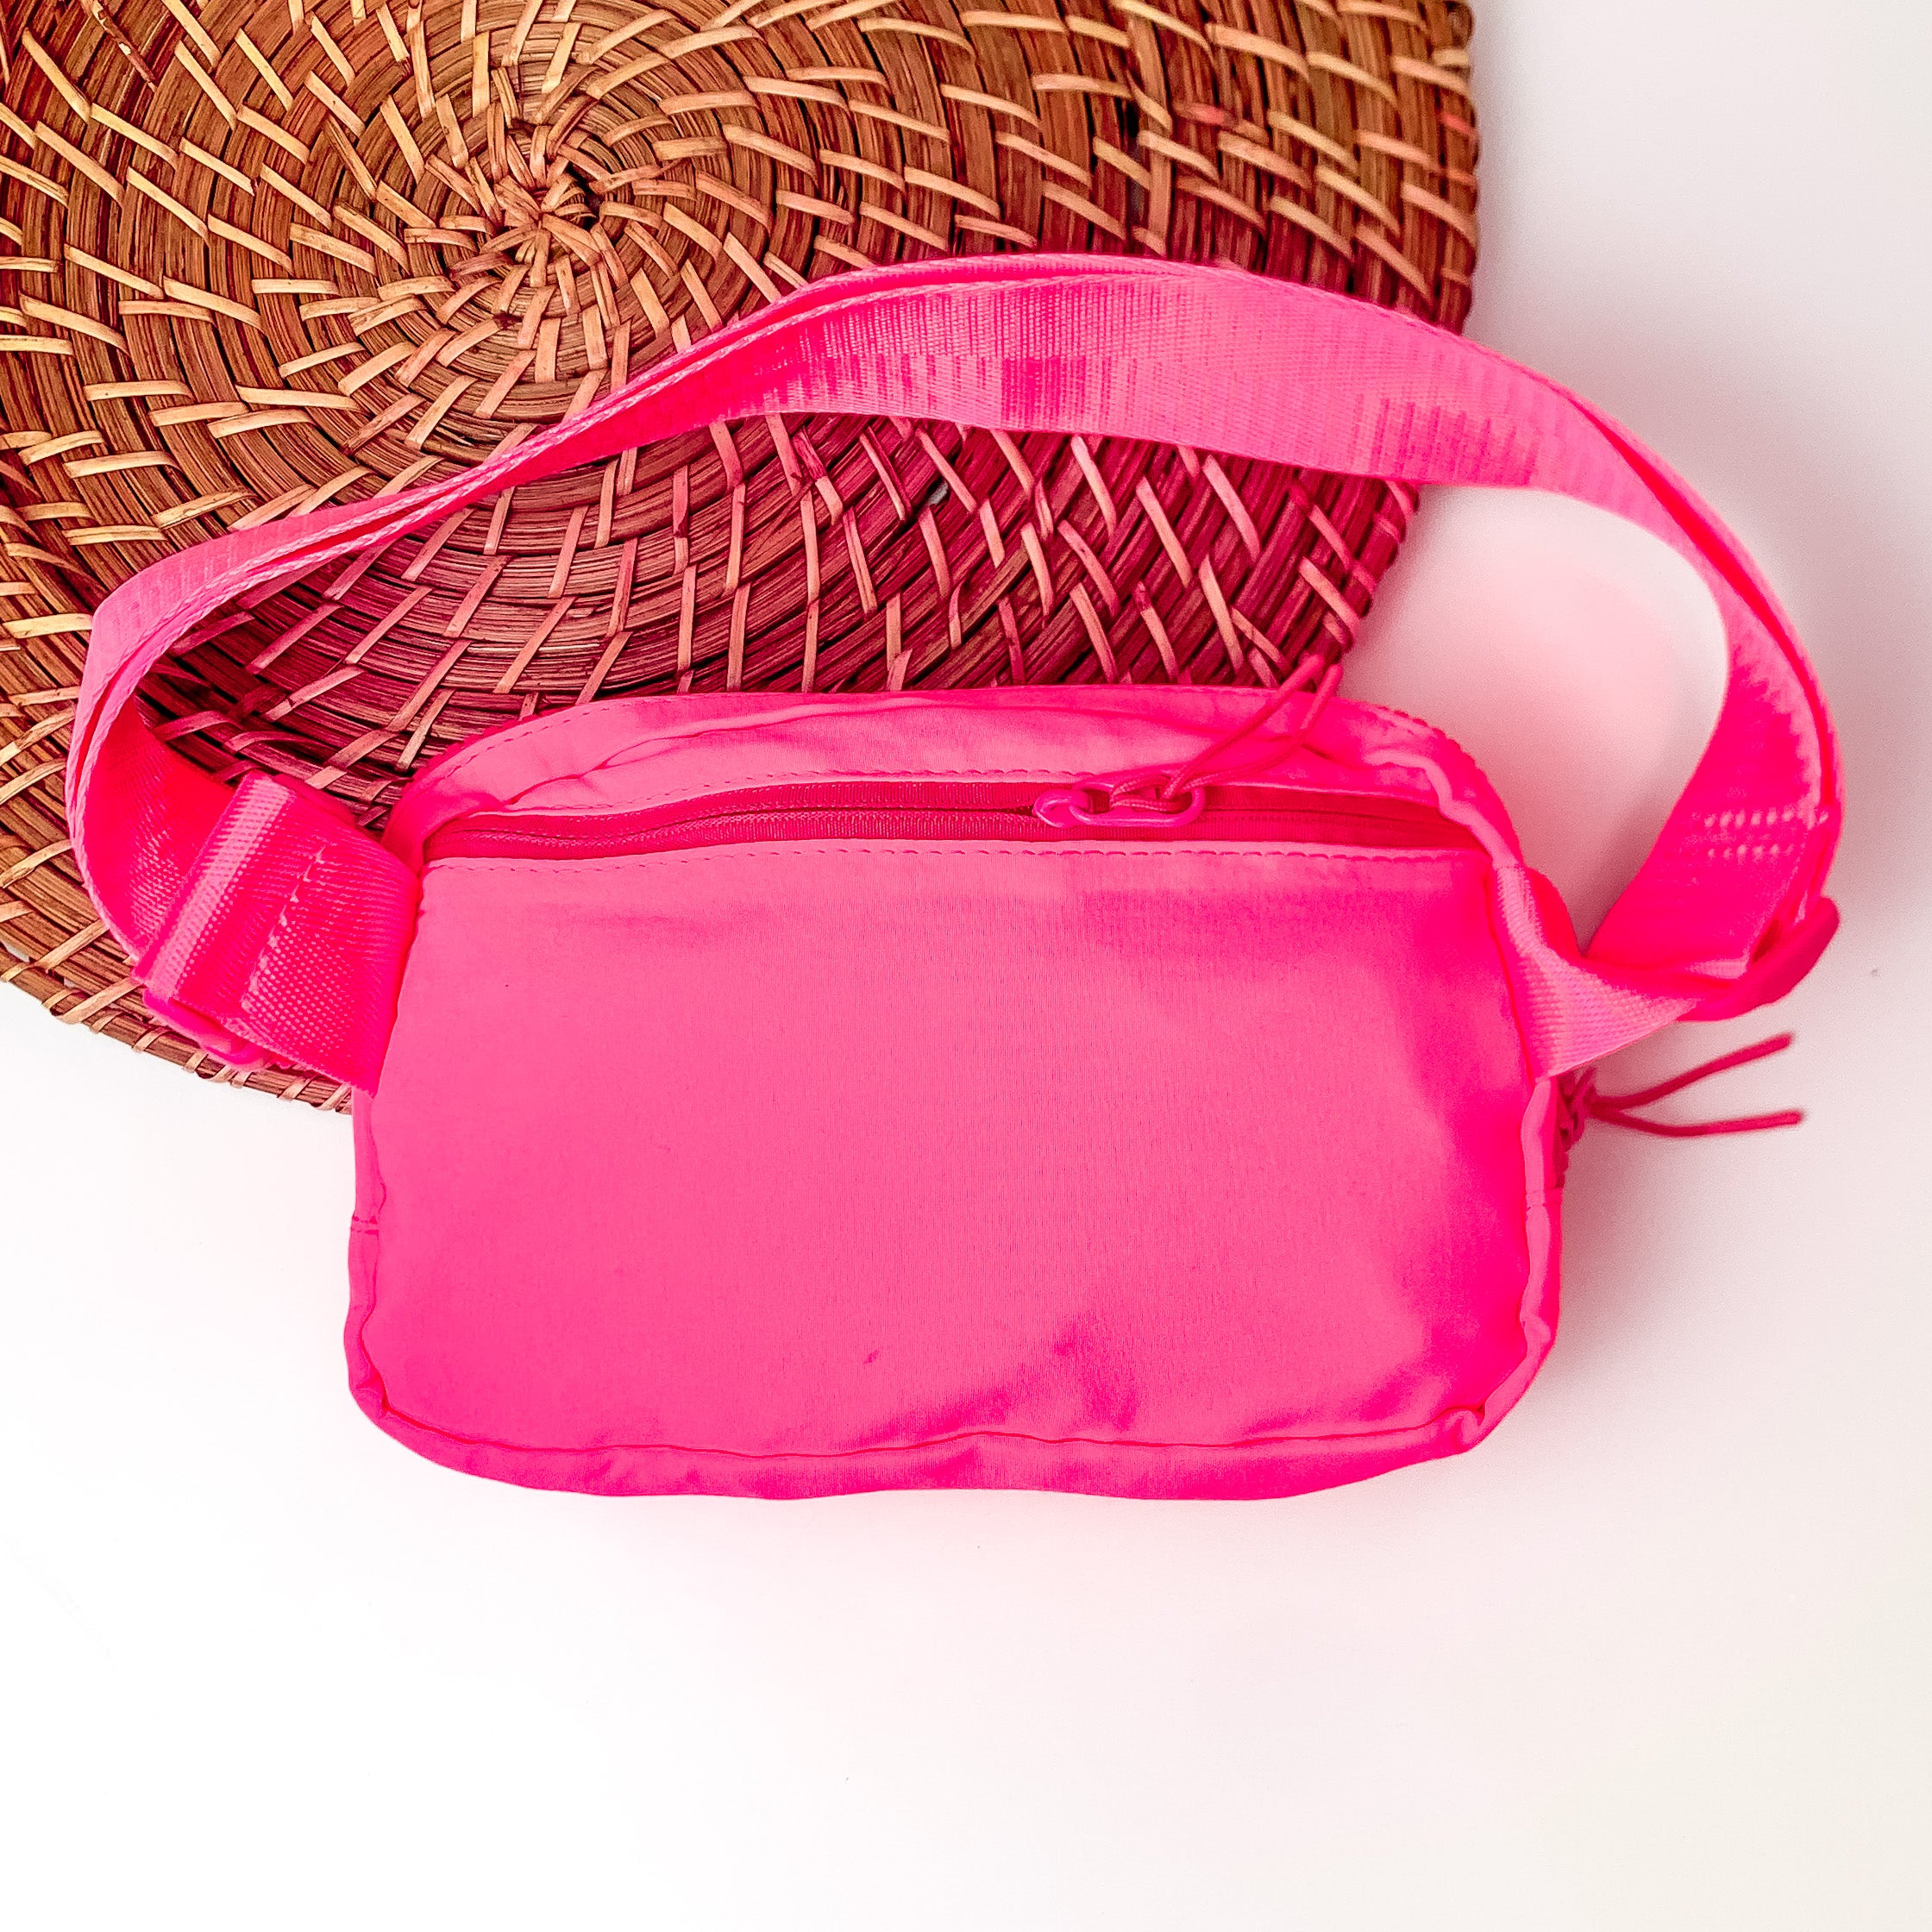 Love the Journey Fanny Pack in Neon Pink